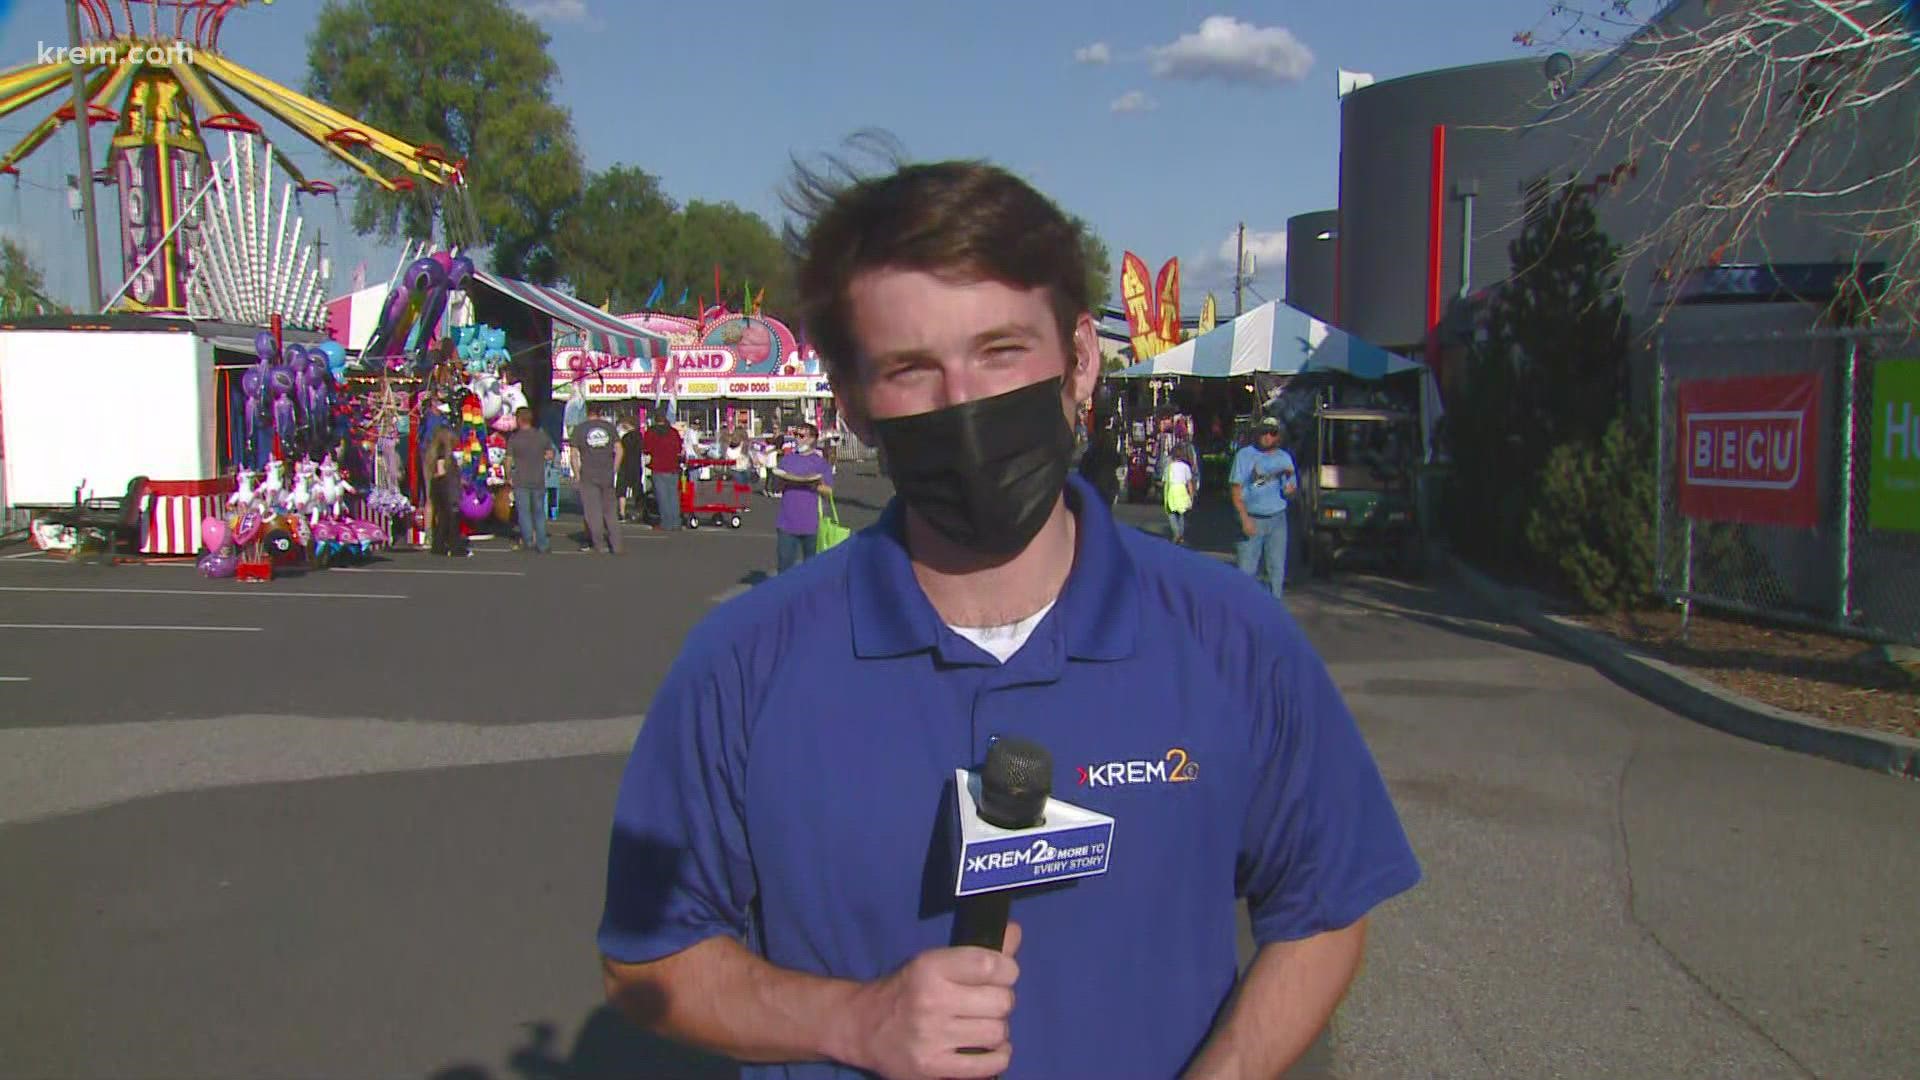 The fair announced it will require visitors to follow Washington's mask mandates indoors and outdoors.